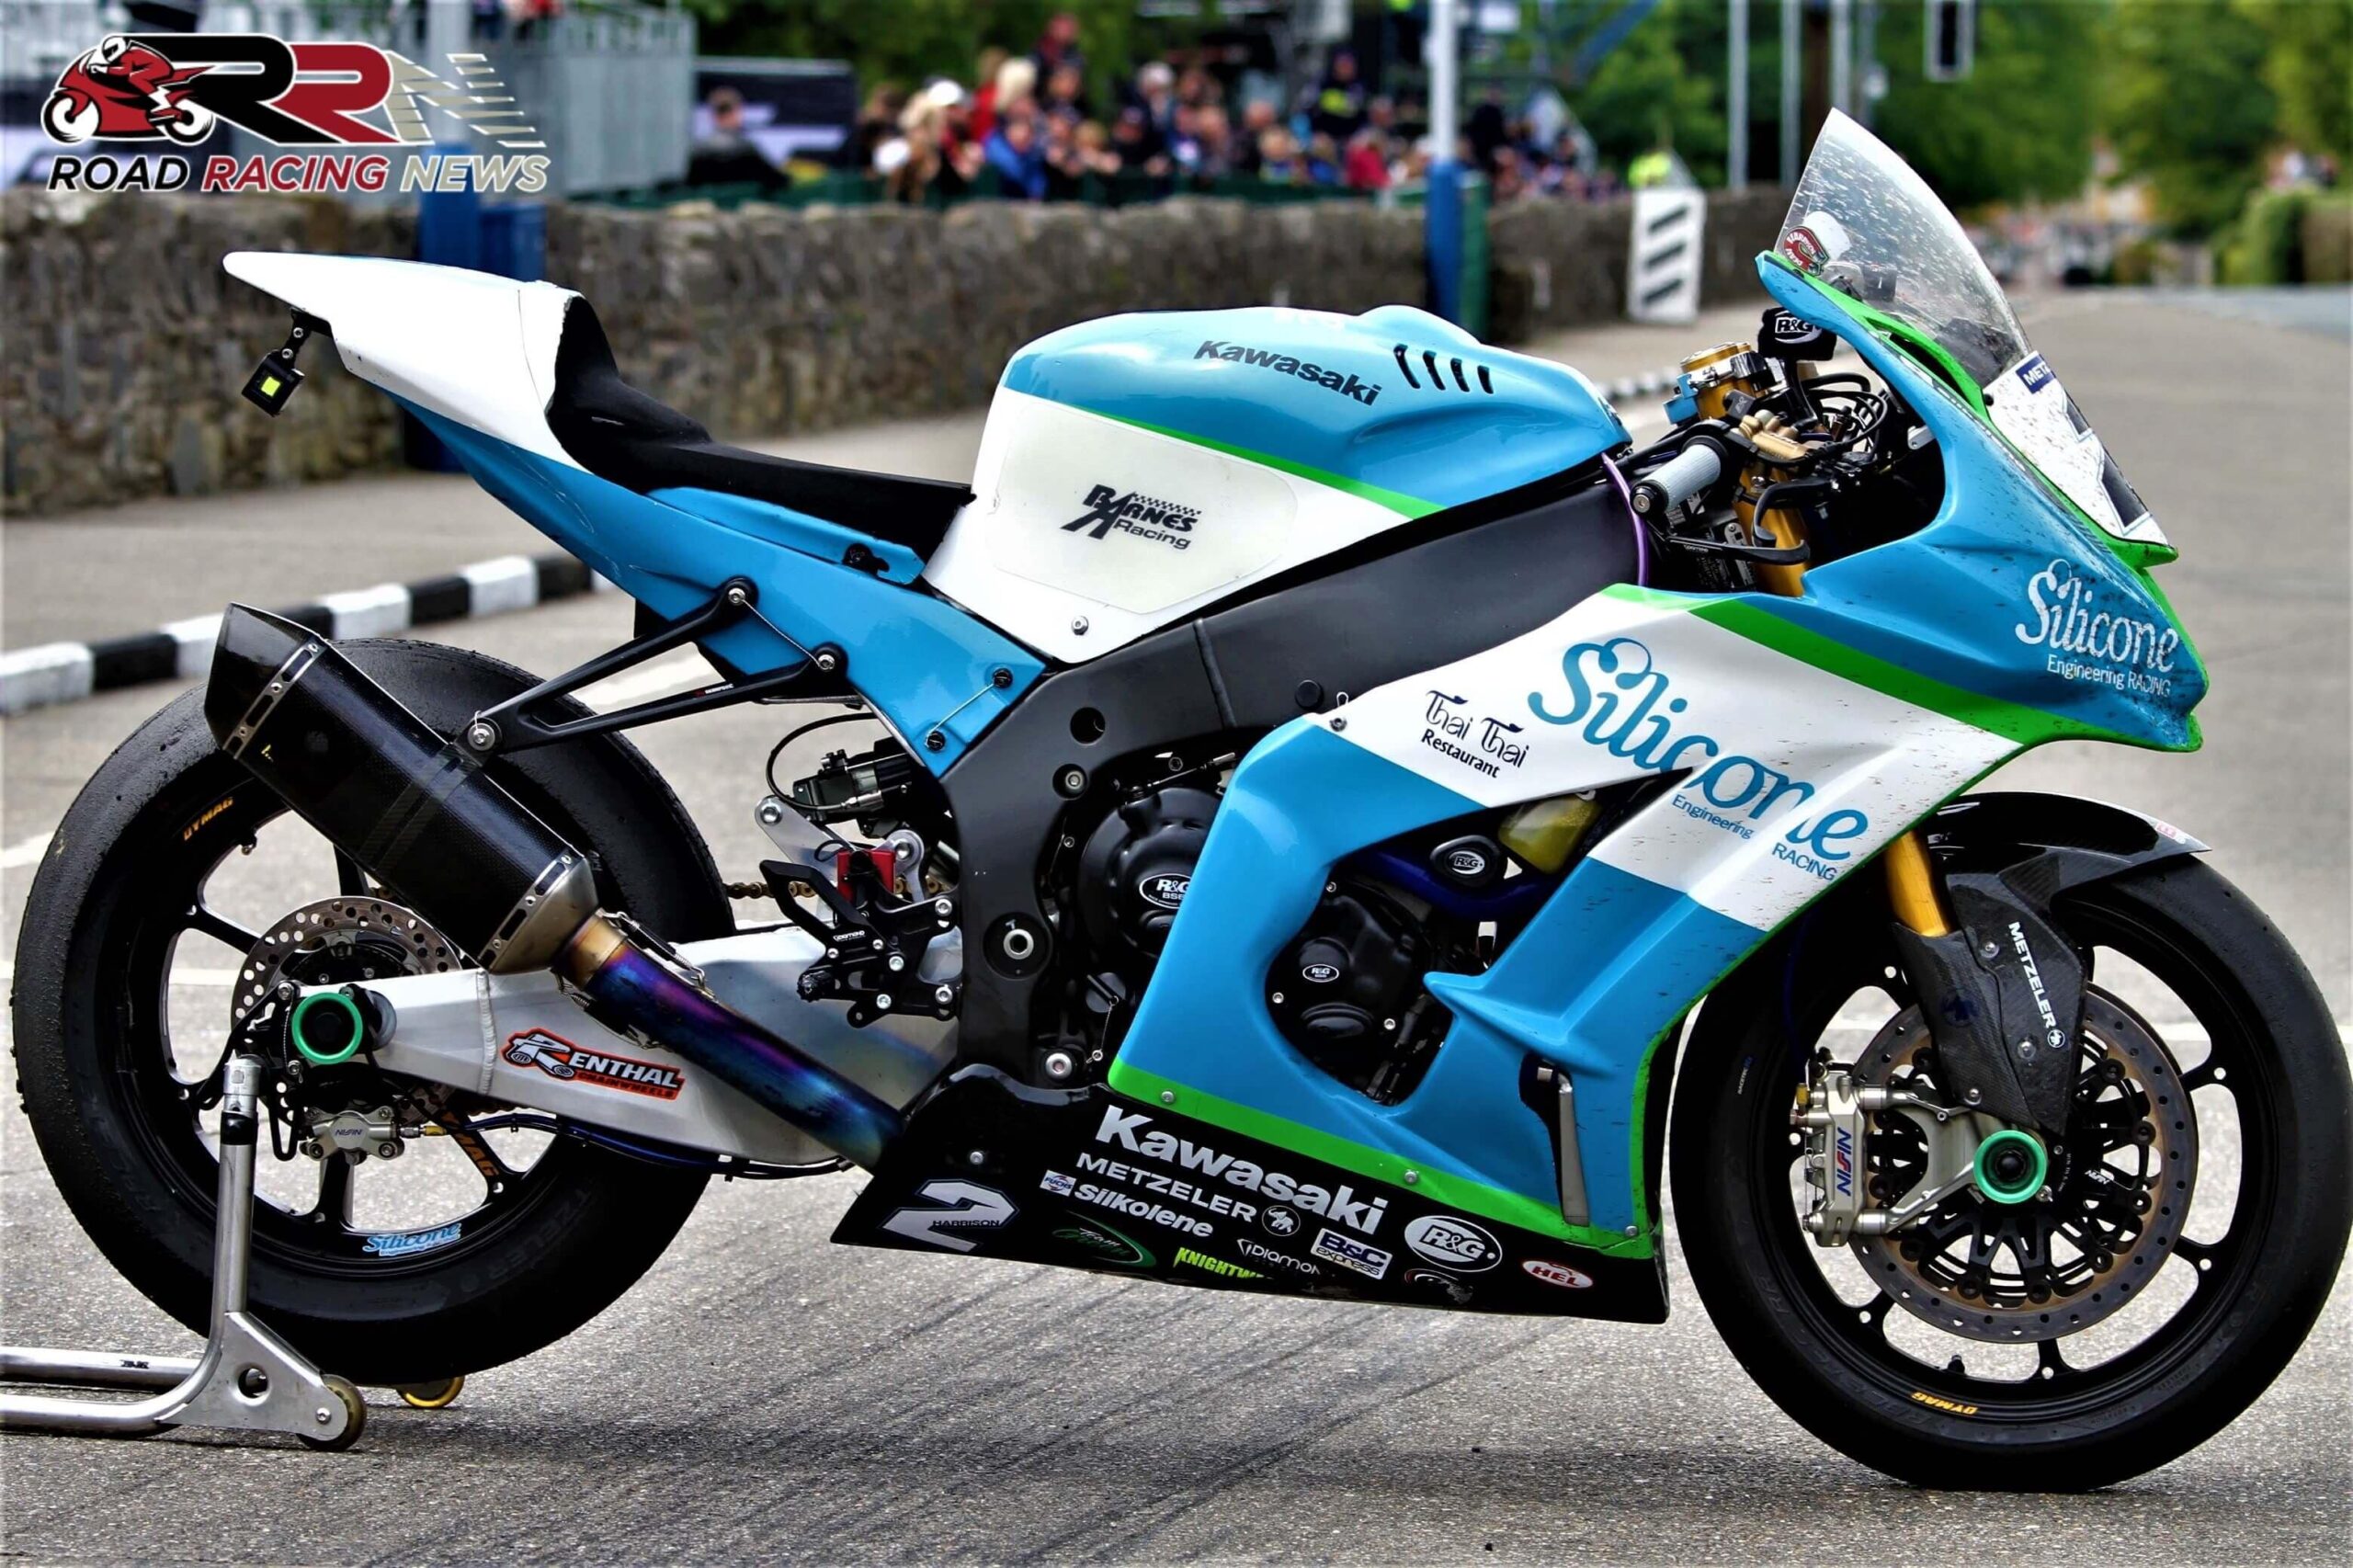 Silicone Engineering Racing To Back Returning Post TT Meeting